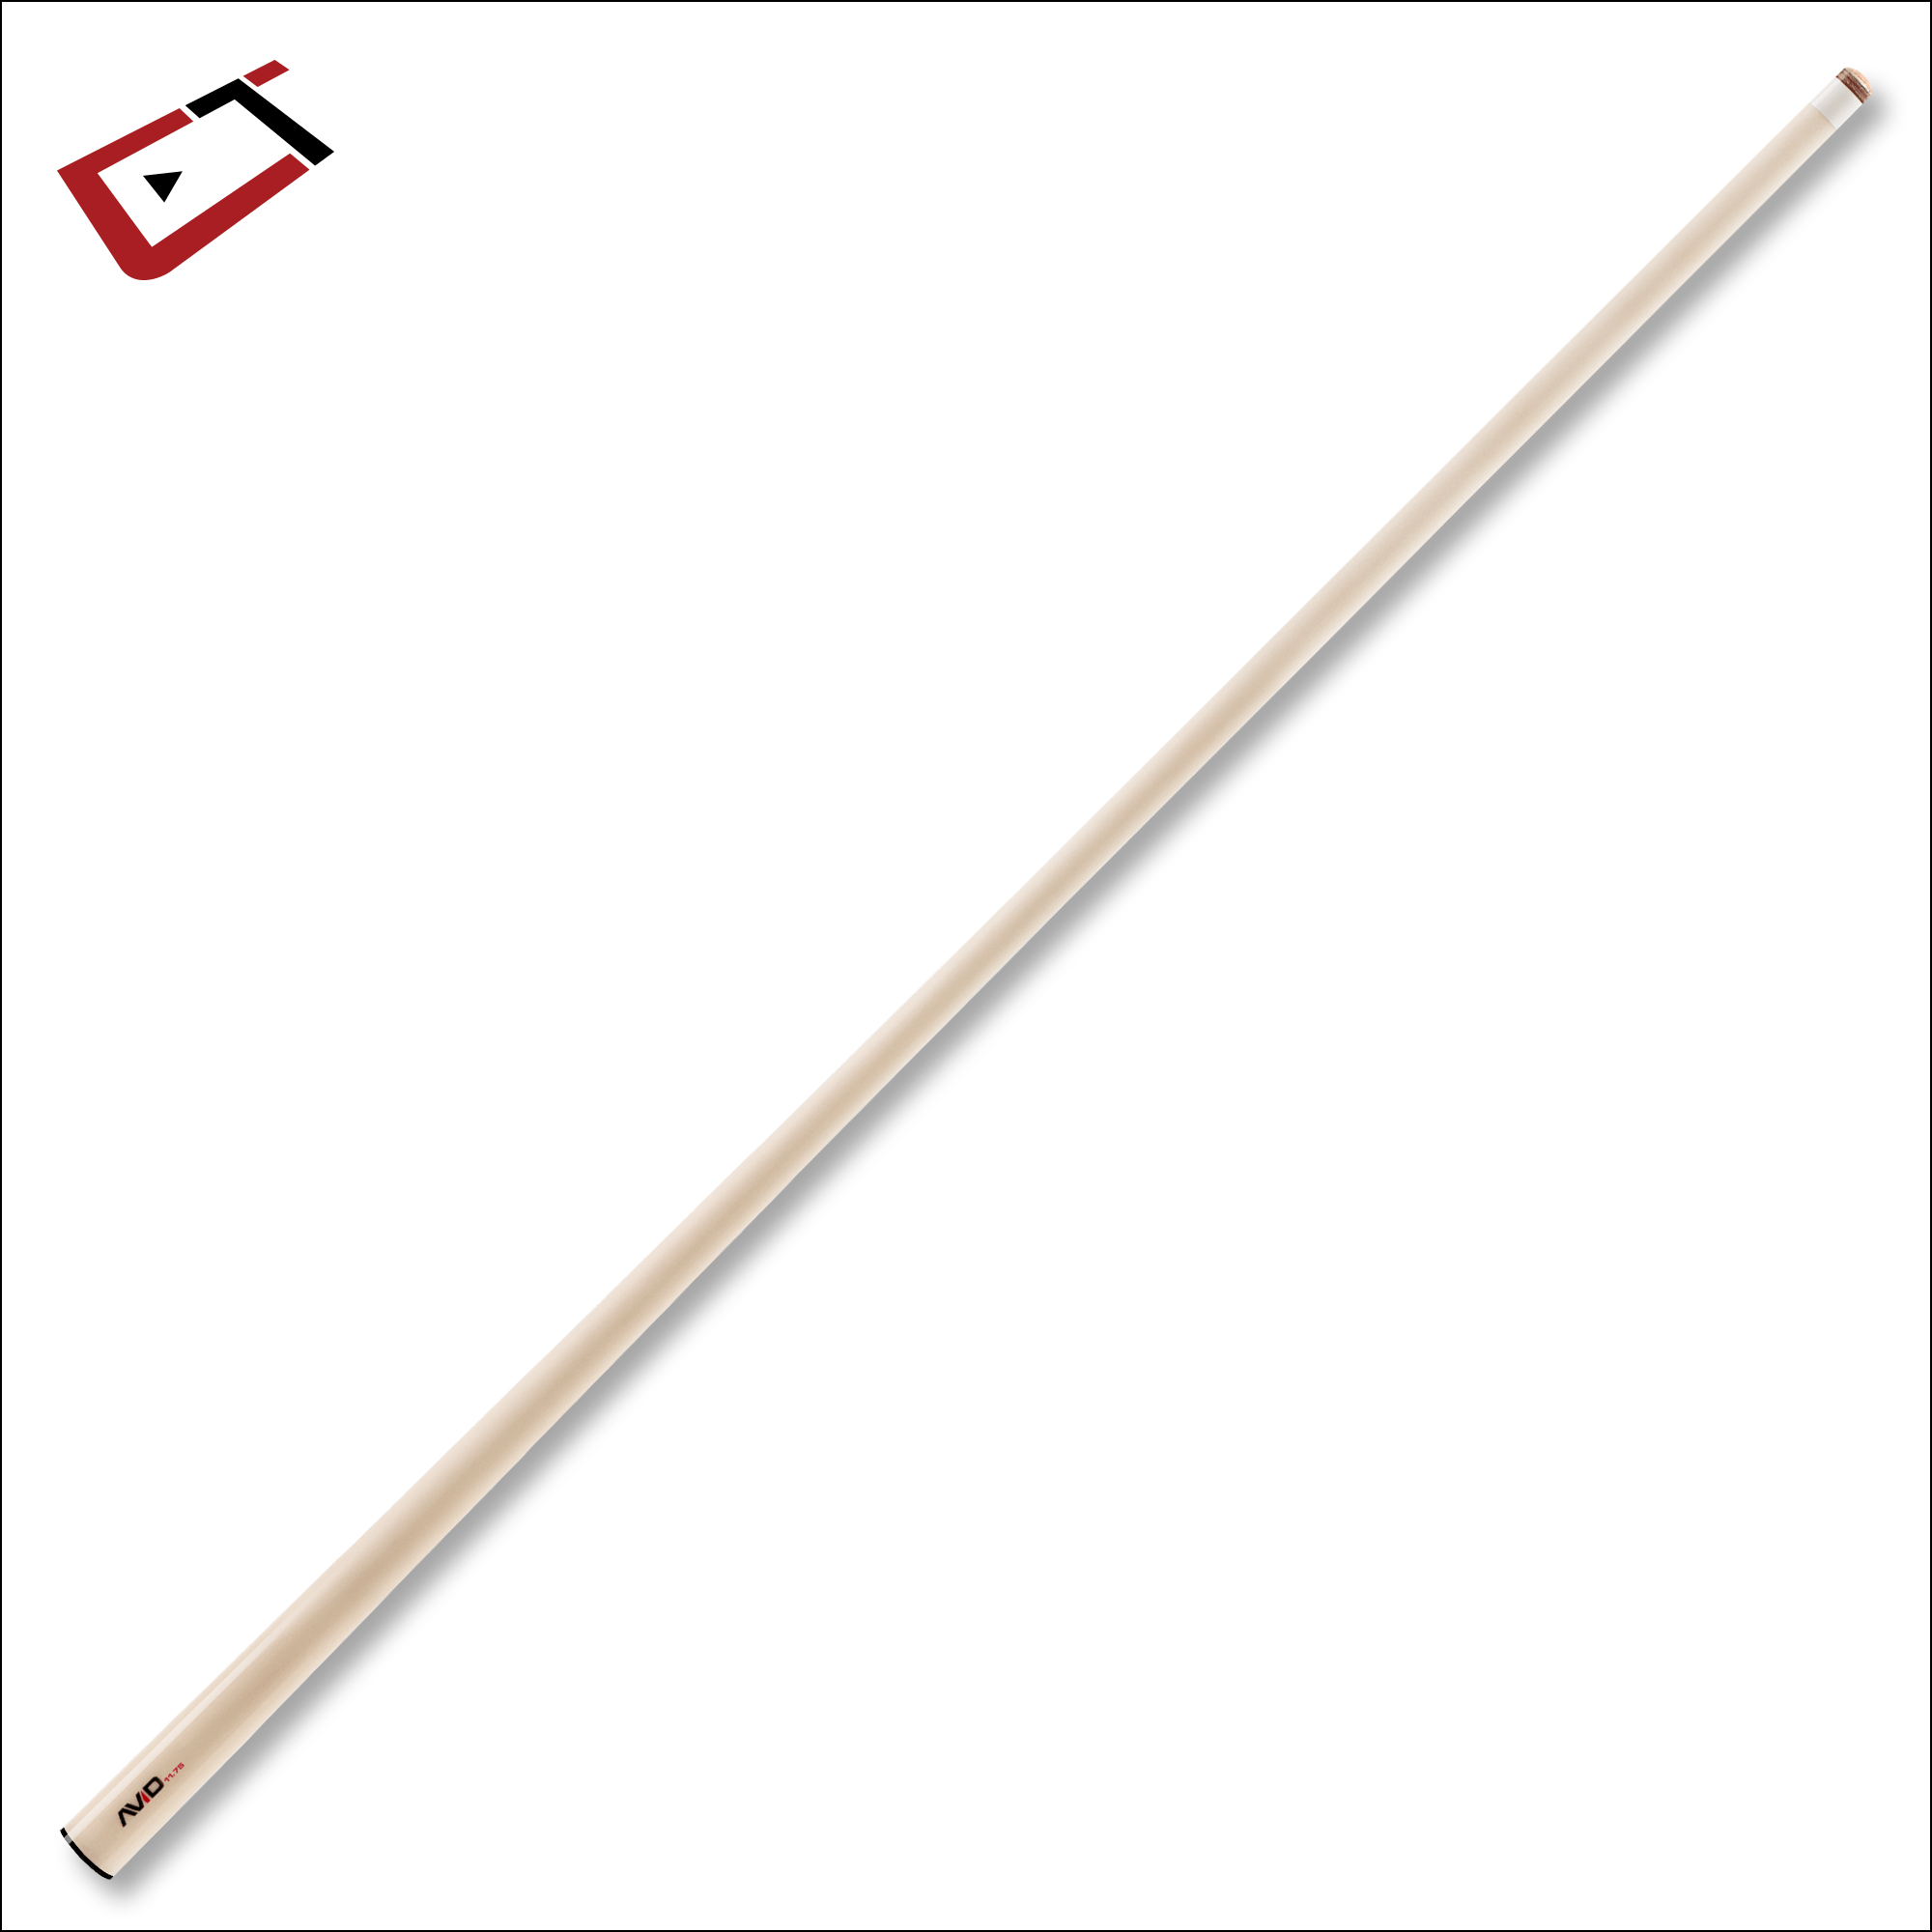 Imperial Pool Cue Imperial - AVID Chroma Currency Cue (11.75 Shaft) - 95-395NW-S